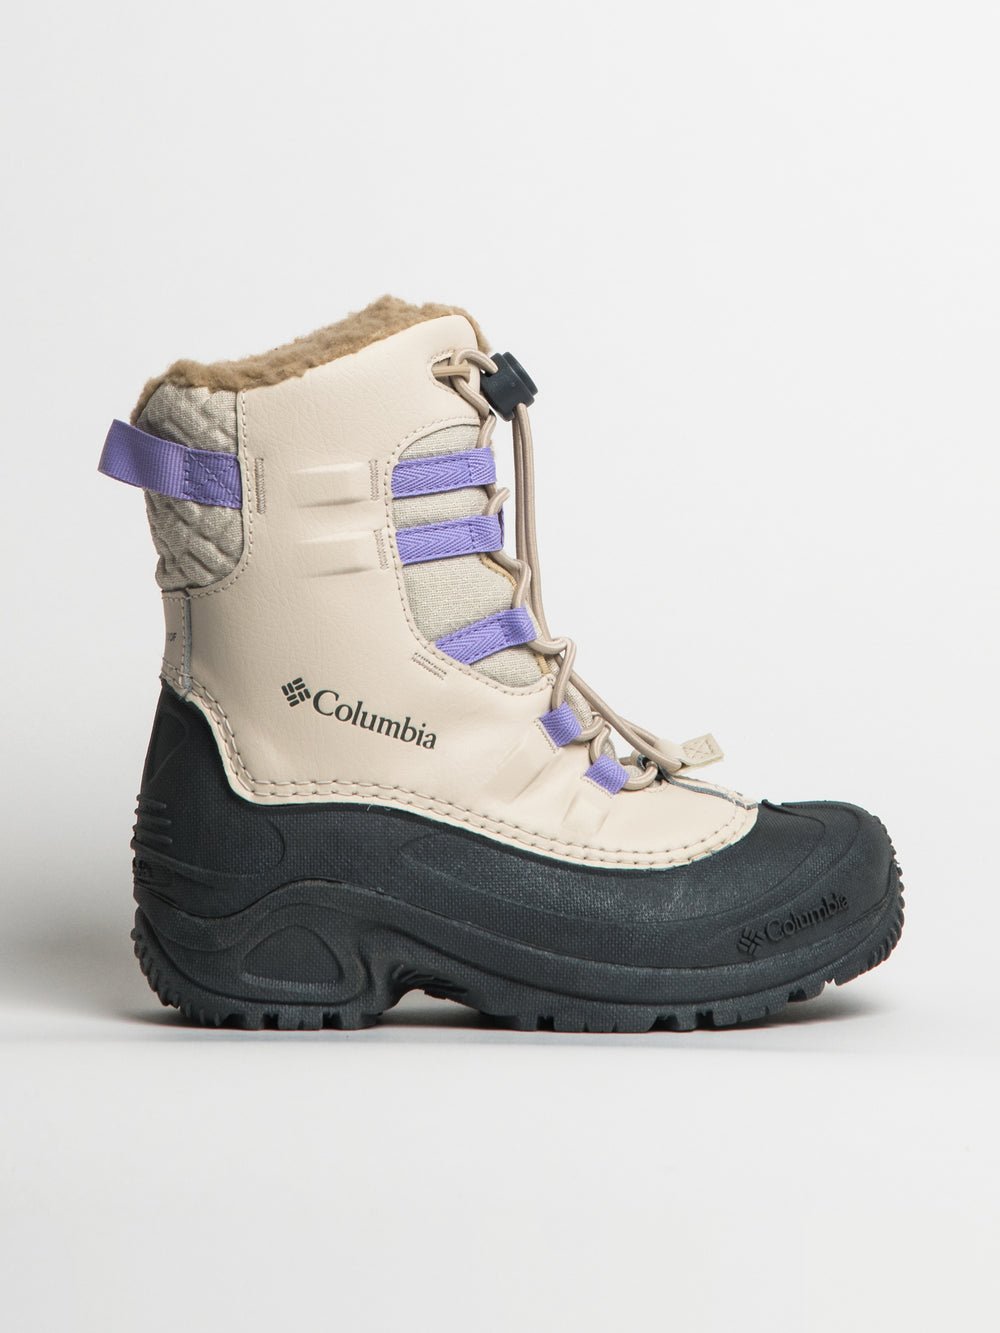 KIDS COLUMBIA YOUTH BUGABOOT CELSIUS BOOT